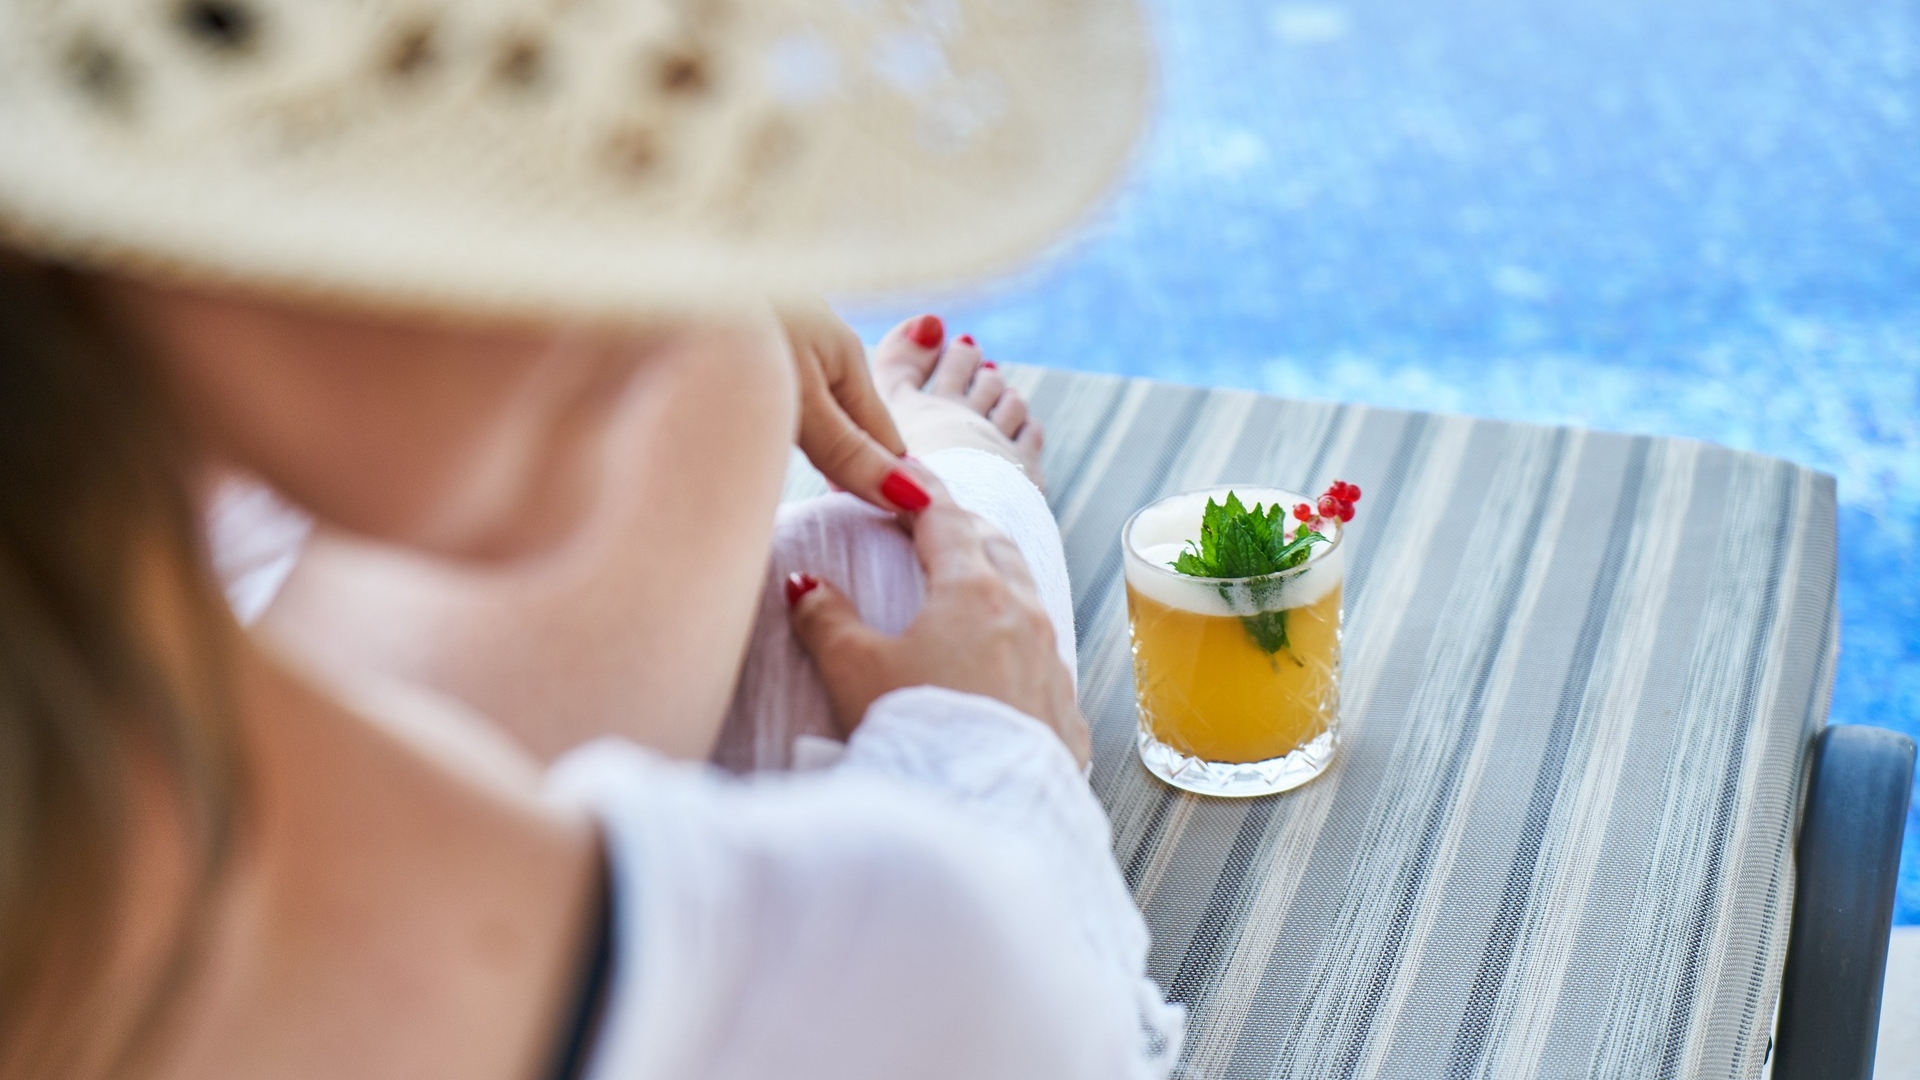 Woman at the Pool with Drink